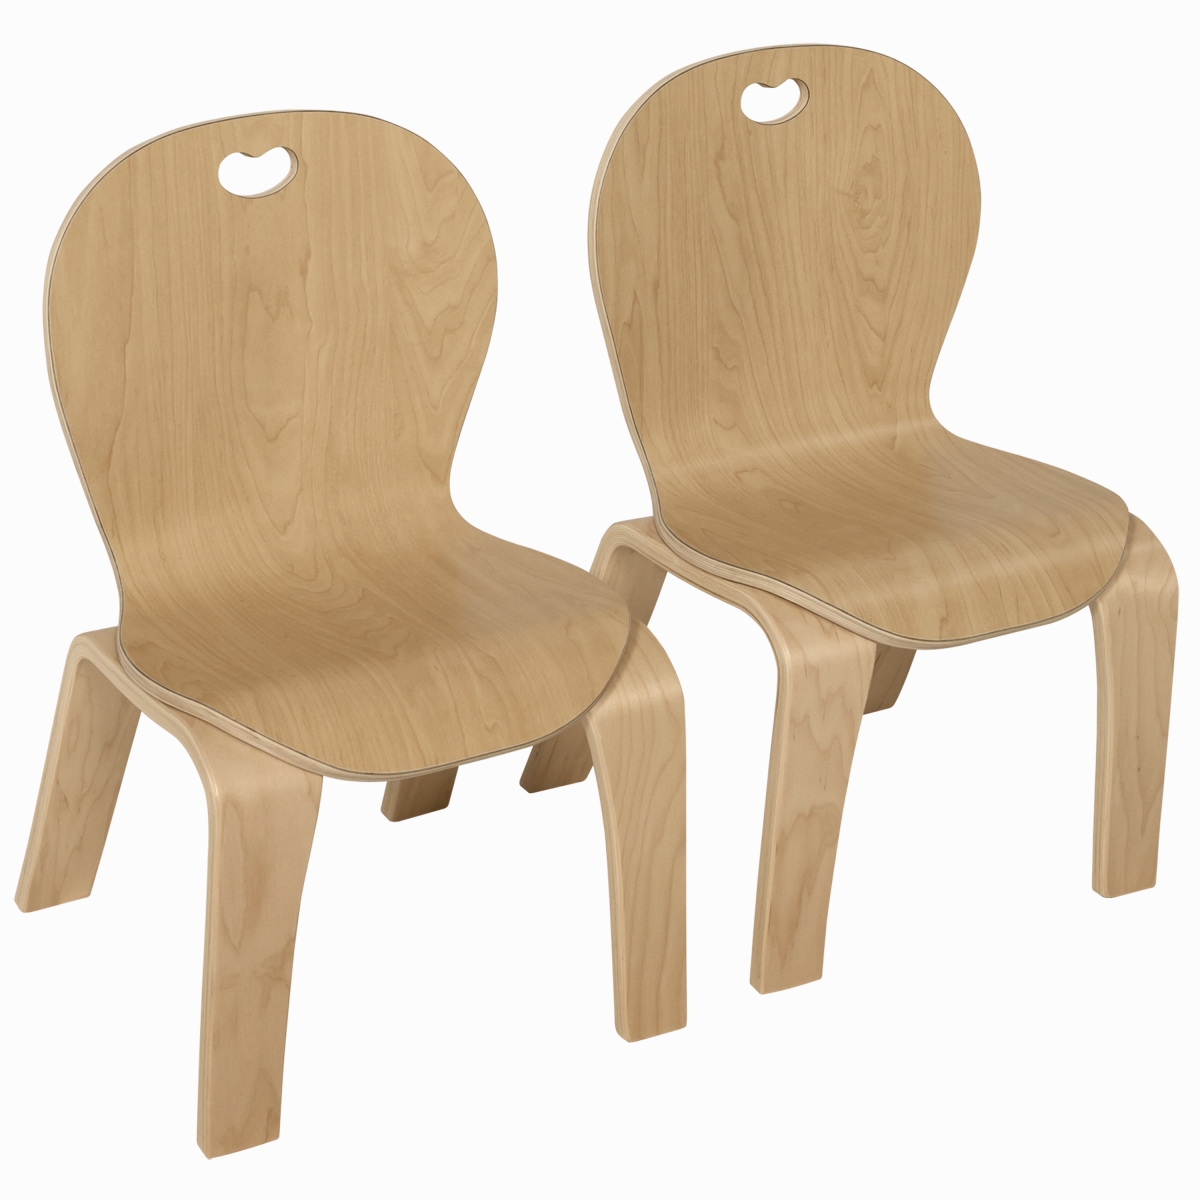 Mh881602 16 In. Bentwood Kids Chair - Set Of 2